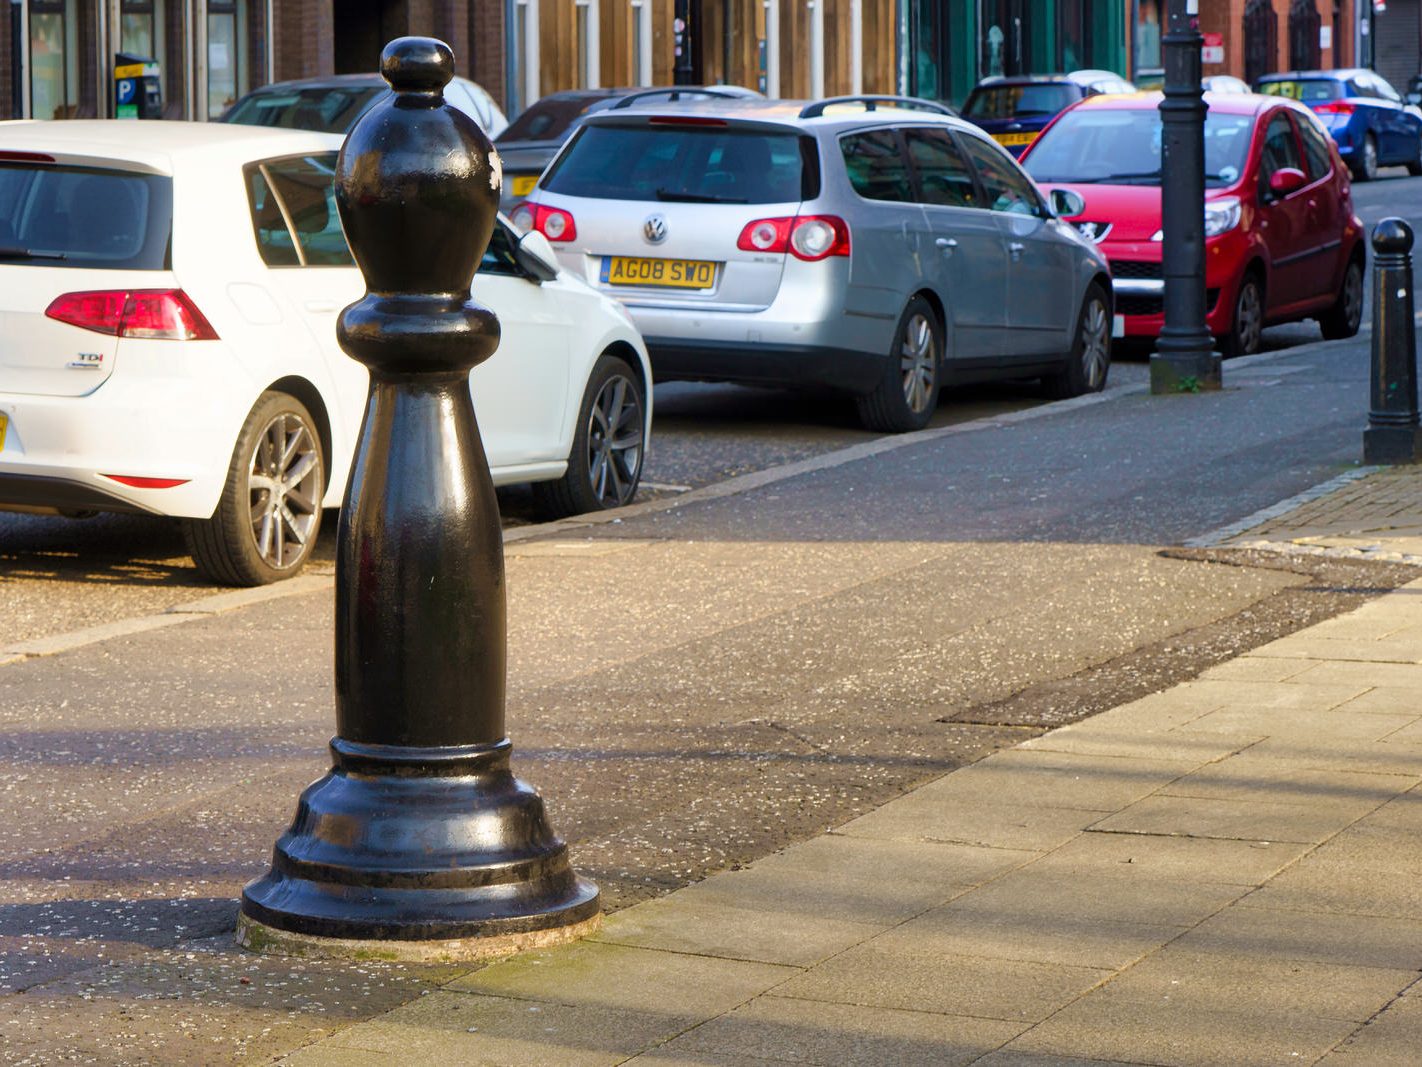 A PAWN VISITING DONEGALL STREET IN BELFAST